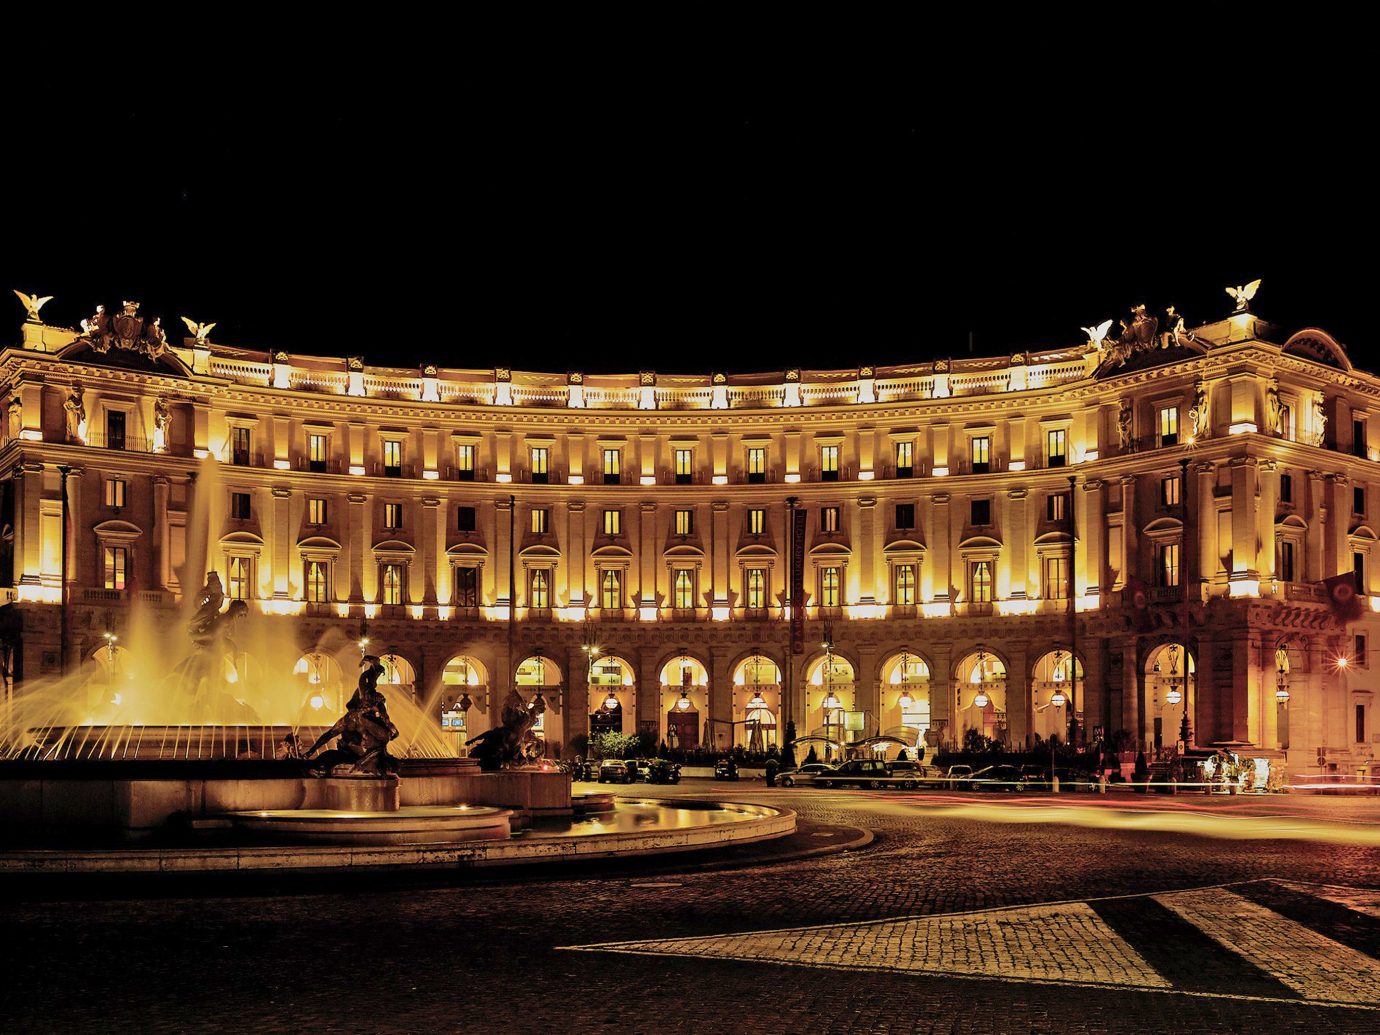 Boutique Hotels City Elegant Grounds Italy Luxury Luxury Travel Romantic Hotels Rome night landmark lit plaza palace metropolis evening opera house light cityscape town square ancient history government building